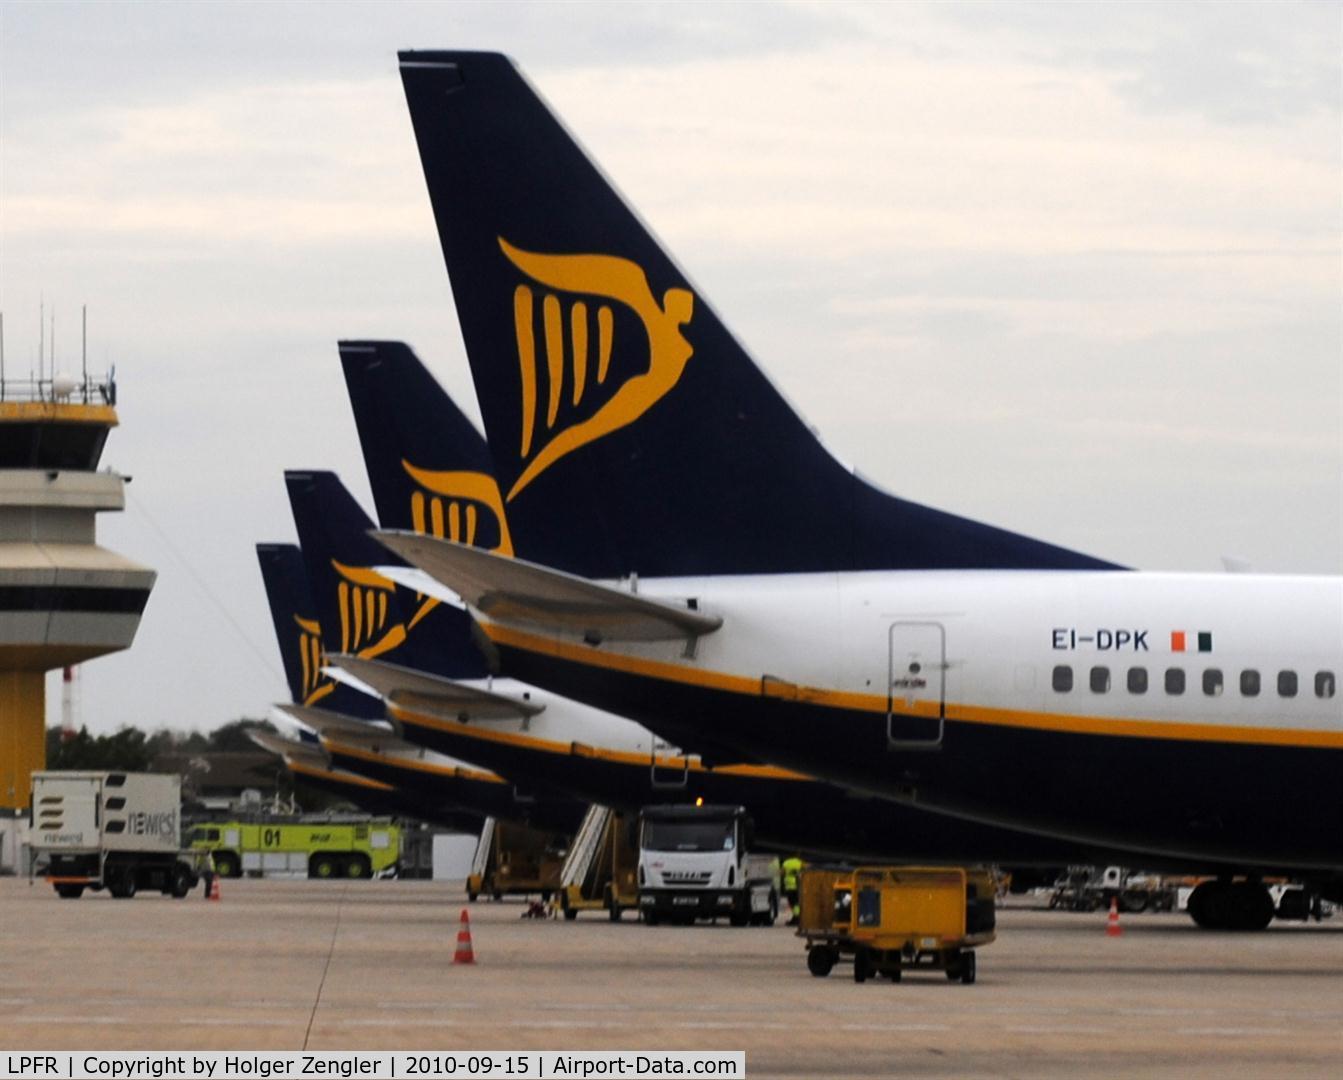 Faro Airport, Faro Portugal (LPFR) - A bunch of right equal RYANAIRliners.